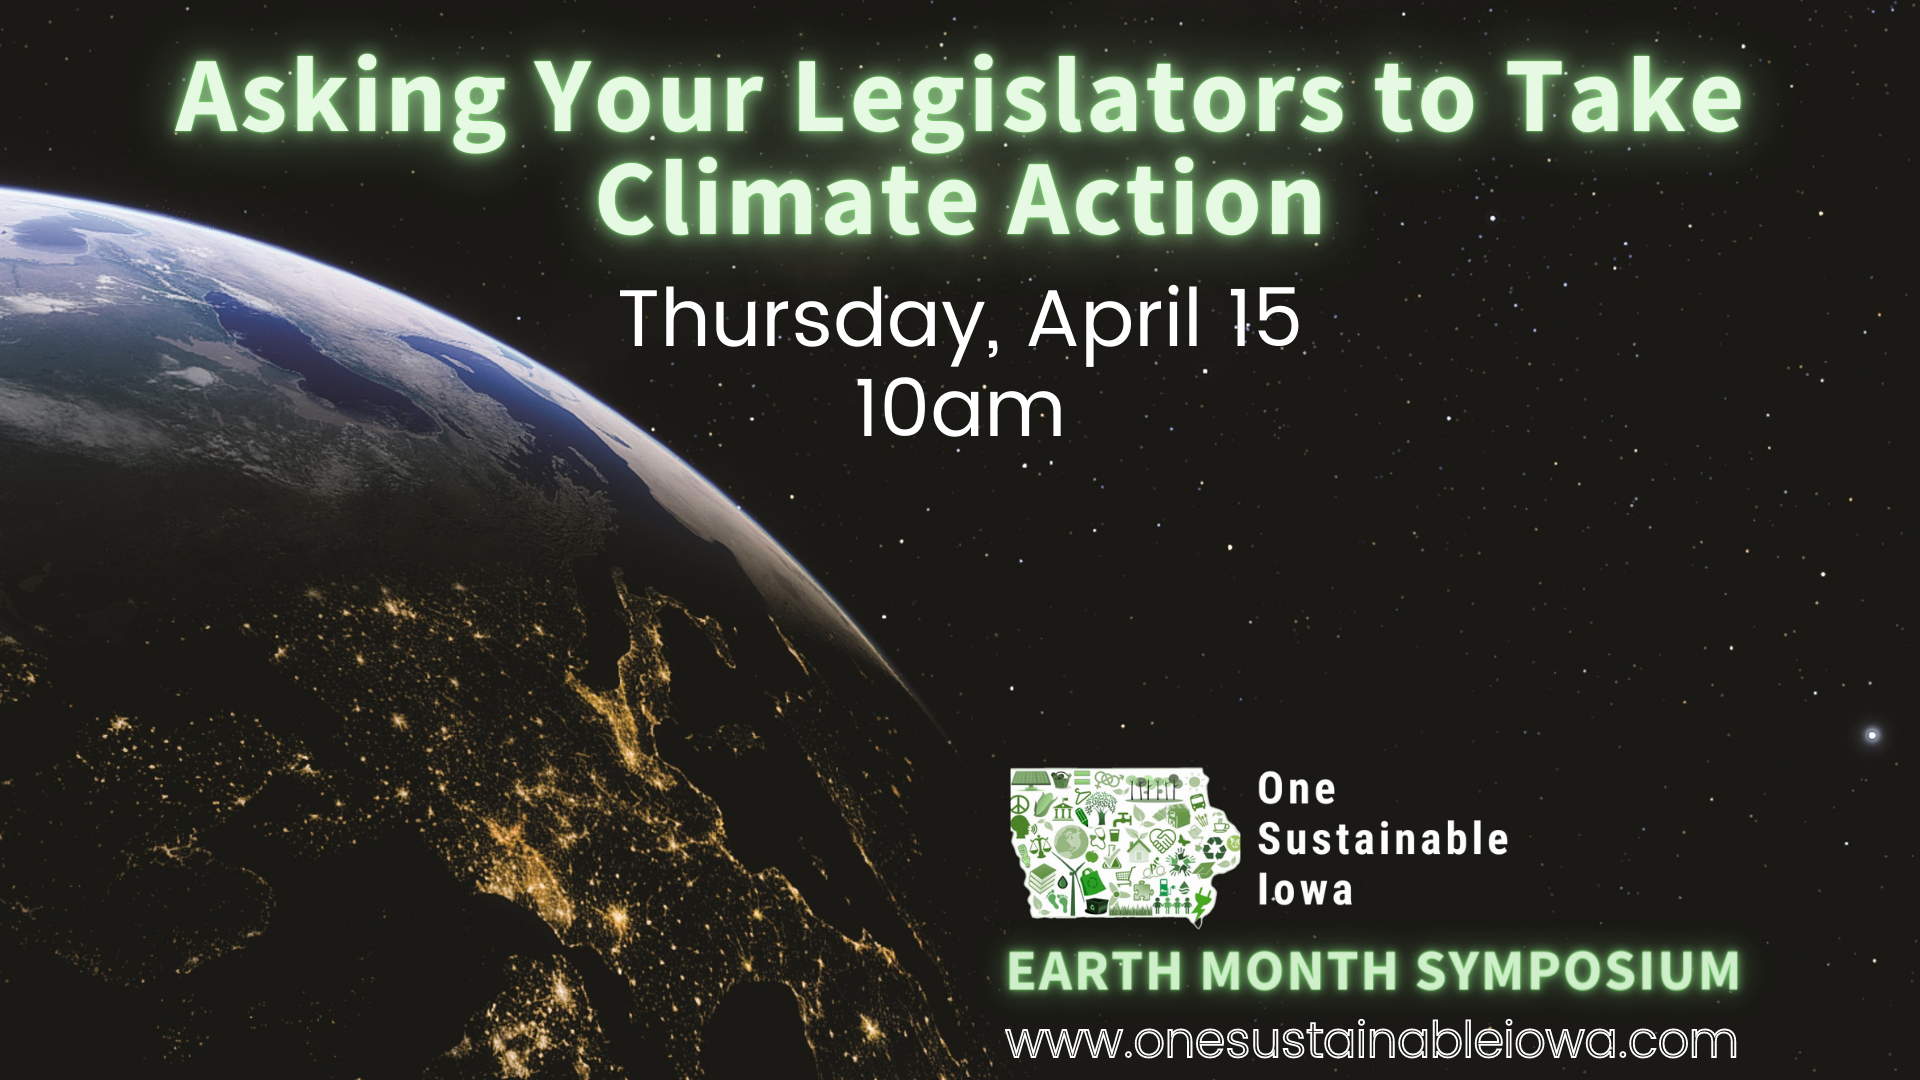  Asking Your Legislators To Take Climate Action: A Guide To Meeting With Your Elected Officials